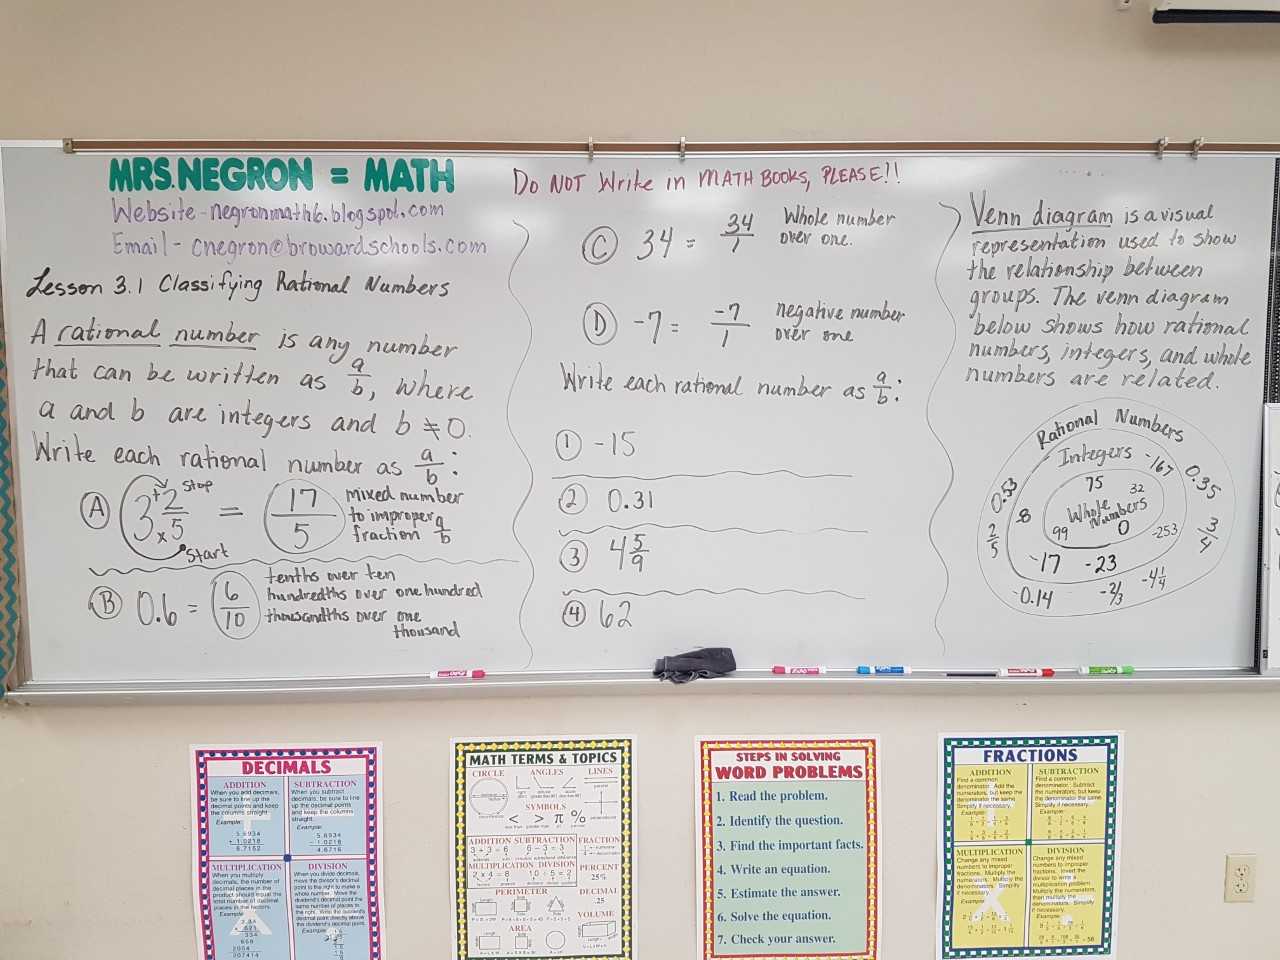 Mrs Negron 6th Grade Math Class Lesson 3 1 Classifying Rational Numbers